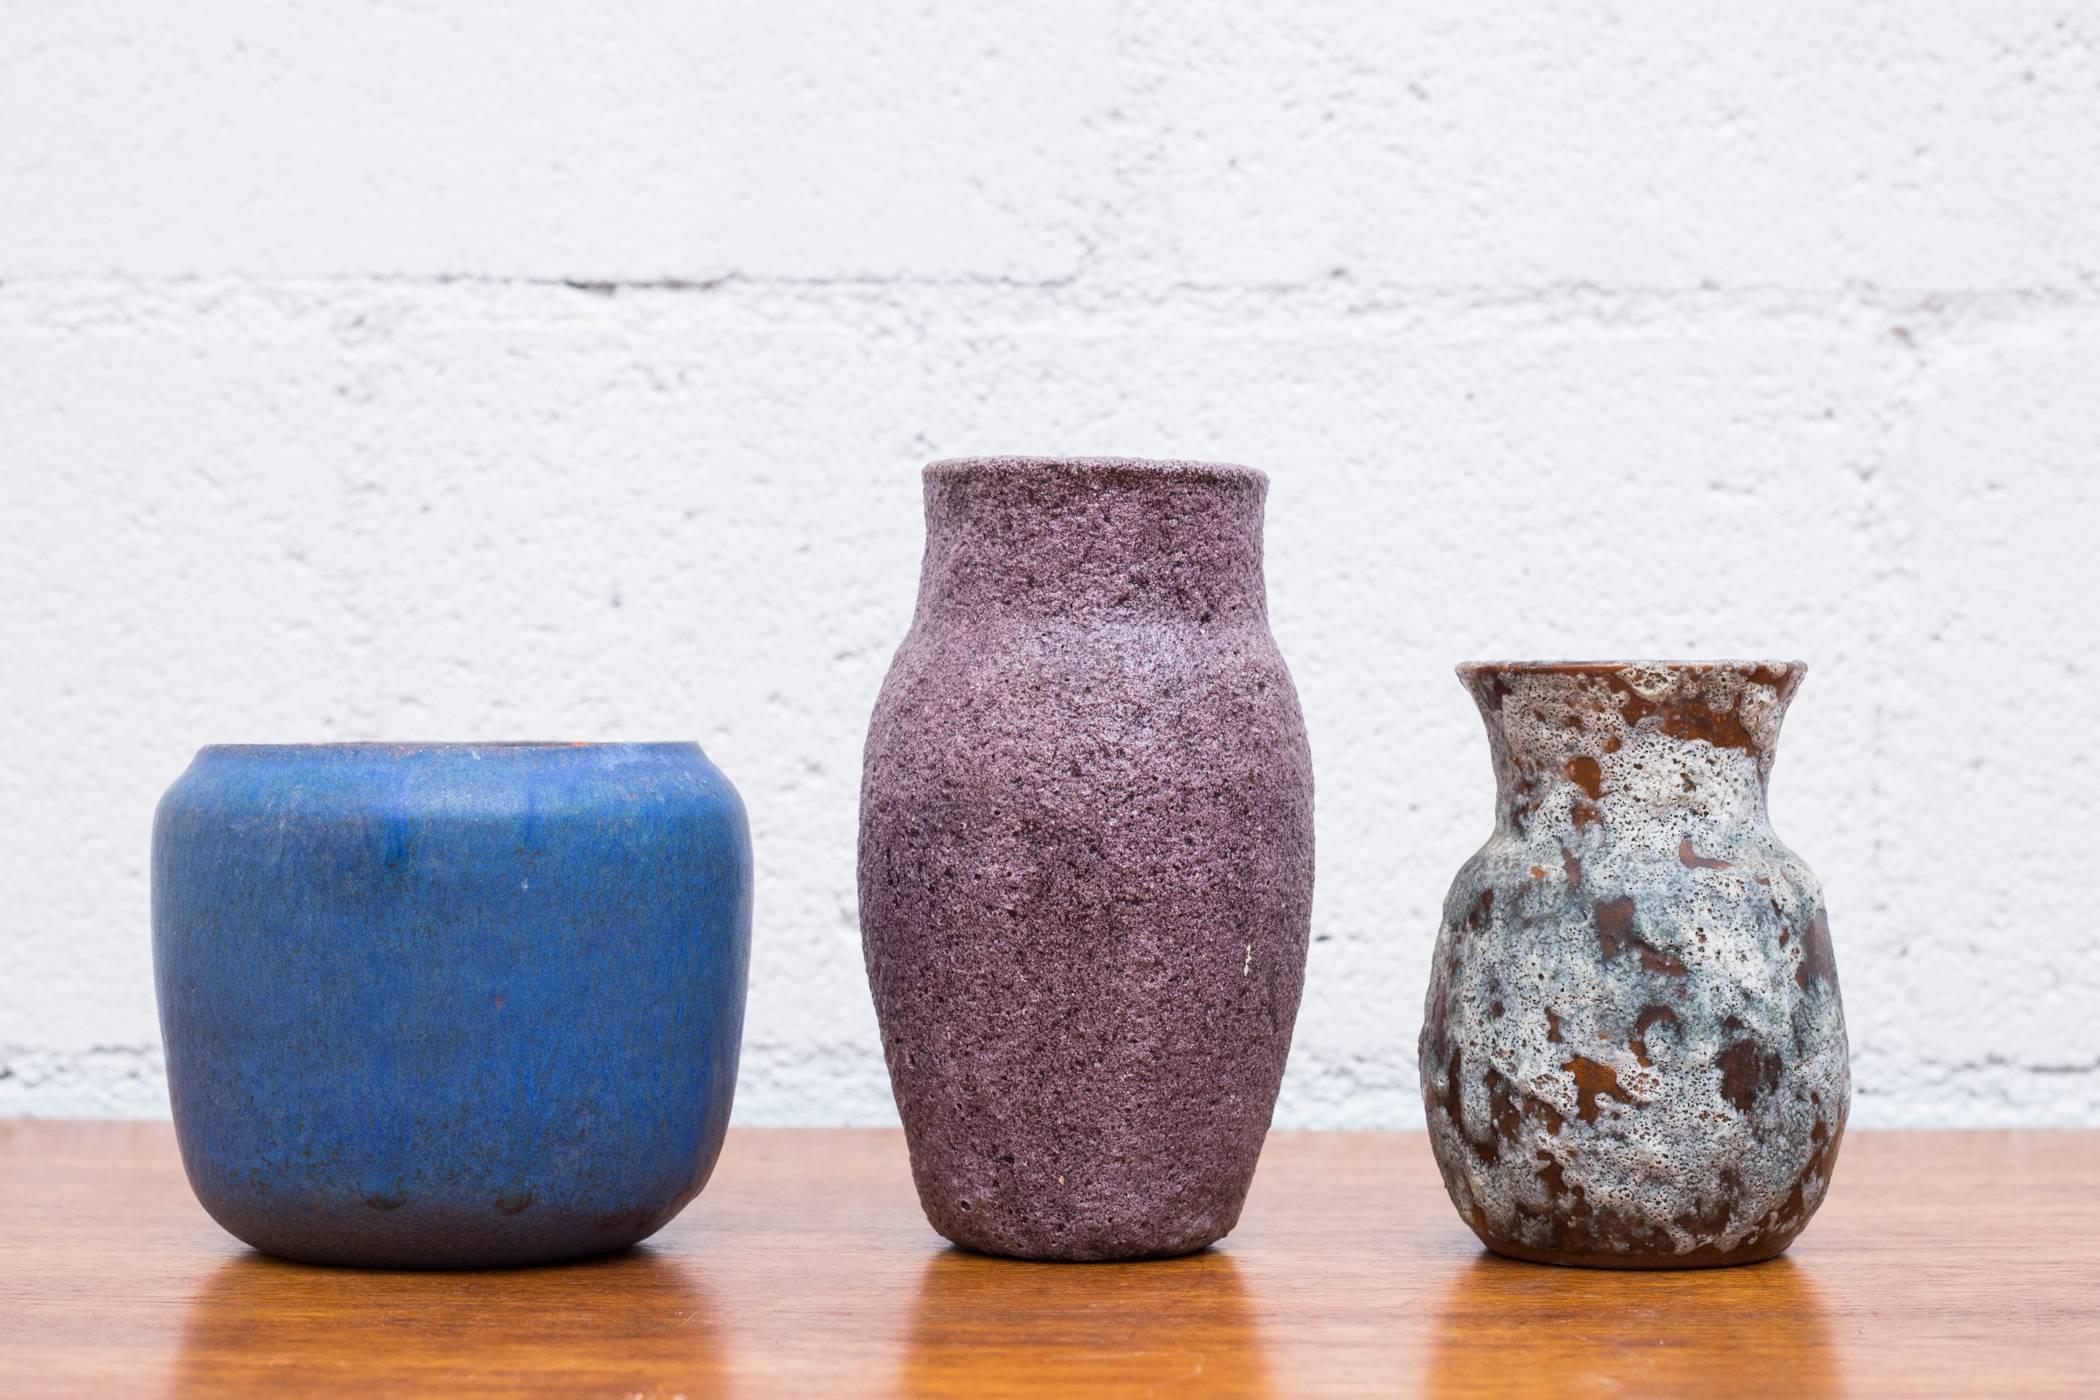 A lovely set of small vases that elegantly showcase the creative Boom Dutch ceramics went through in the middle of the last century. Forever looking for a different approach to ceramics companies like Vest Ceramics, Duifs Ceramics, Ravelli and